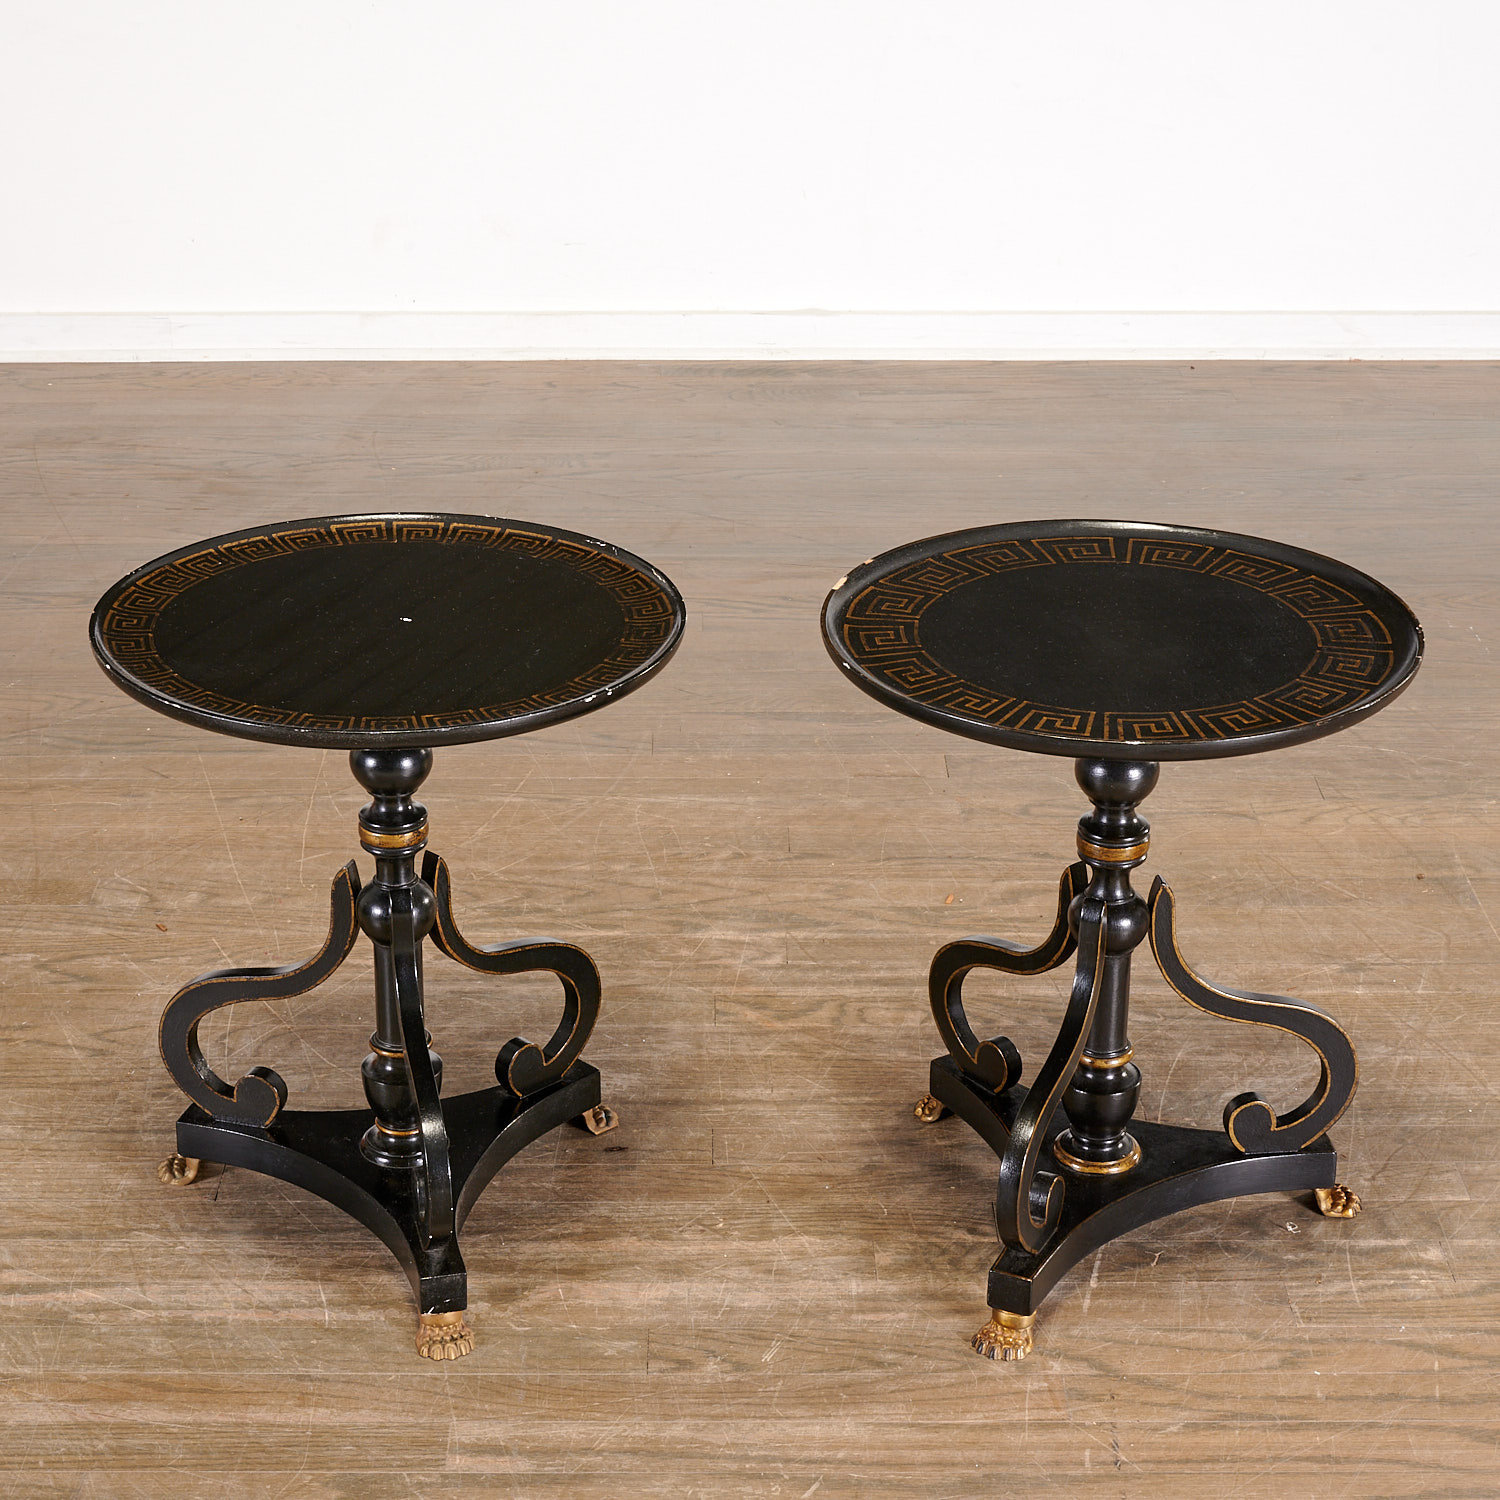 PAIR REGENCY STYLE BLACK LACQUERED 2ce185